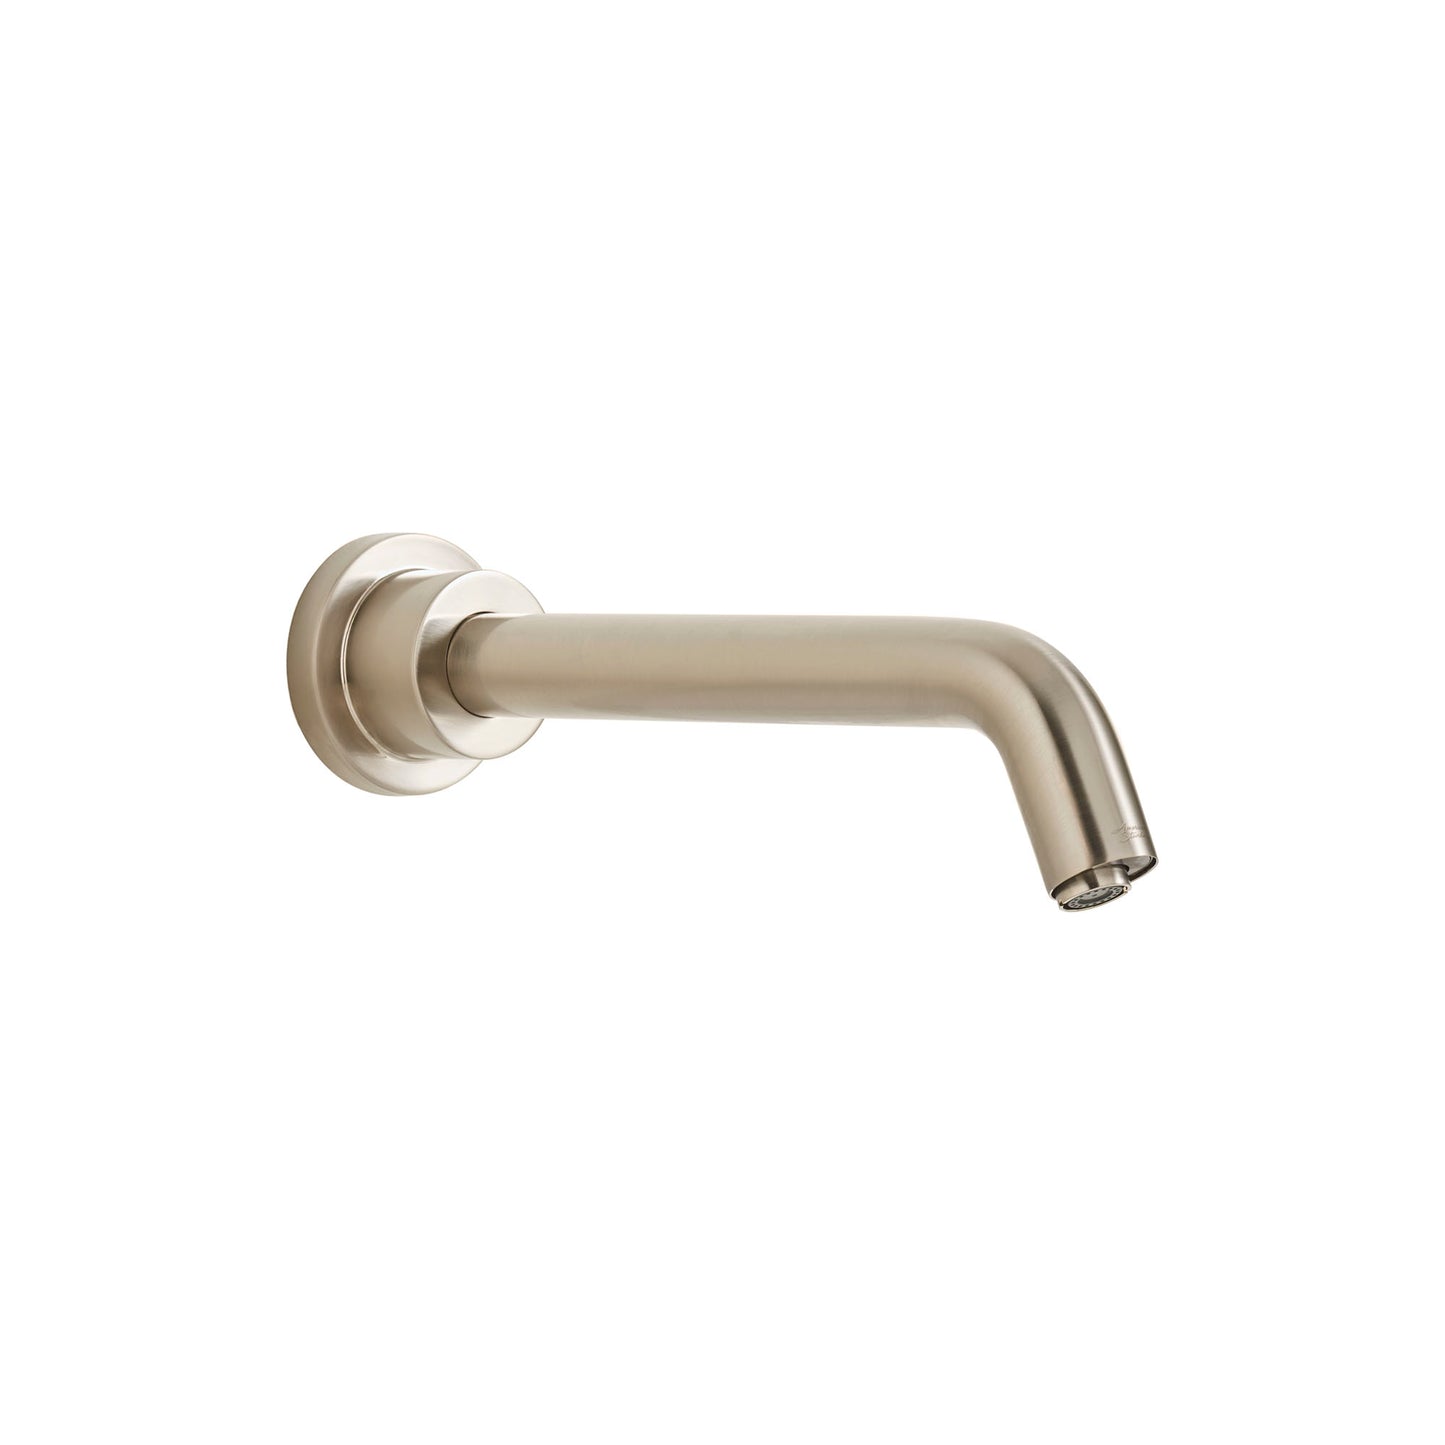 AMERICAN-STANDARD T06B306.295, Serin Touchless Wall-Mount Trim, Base Model, 0.35 gpm/1.3 Lpm in Brushed Nickel